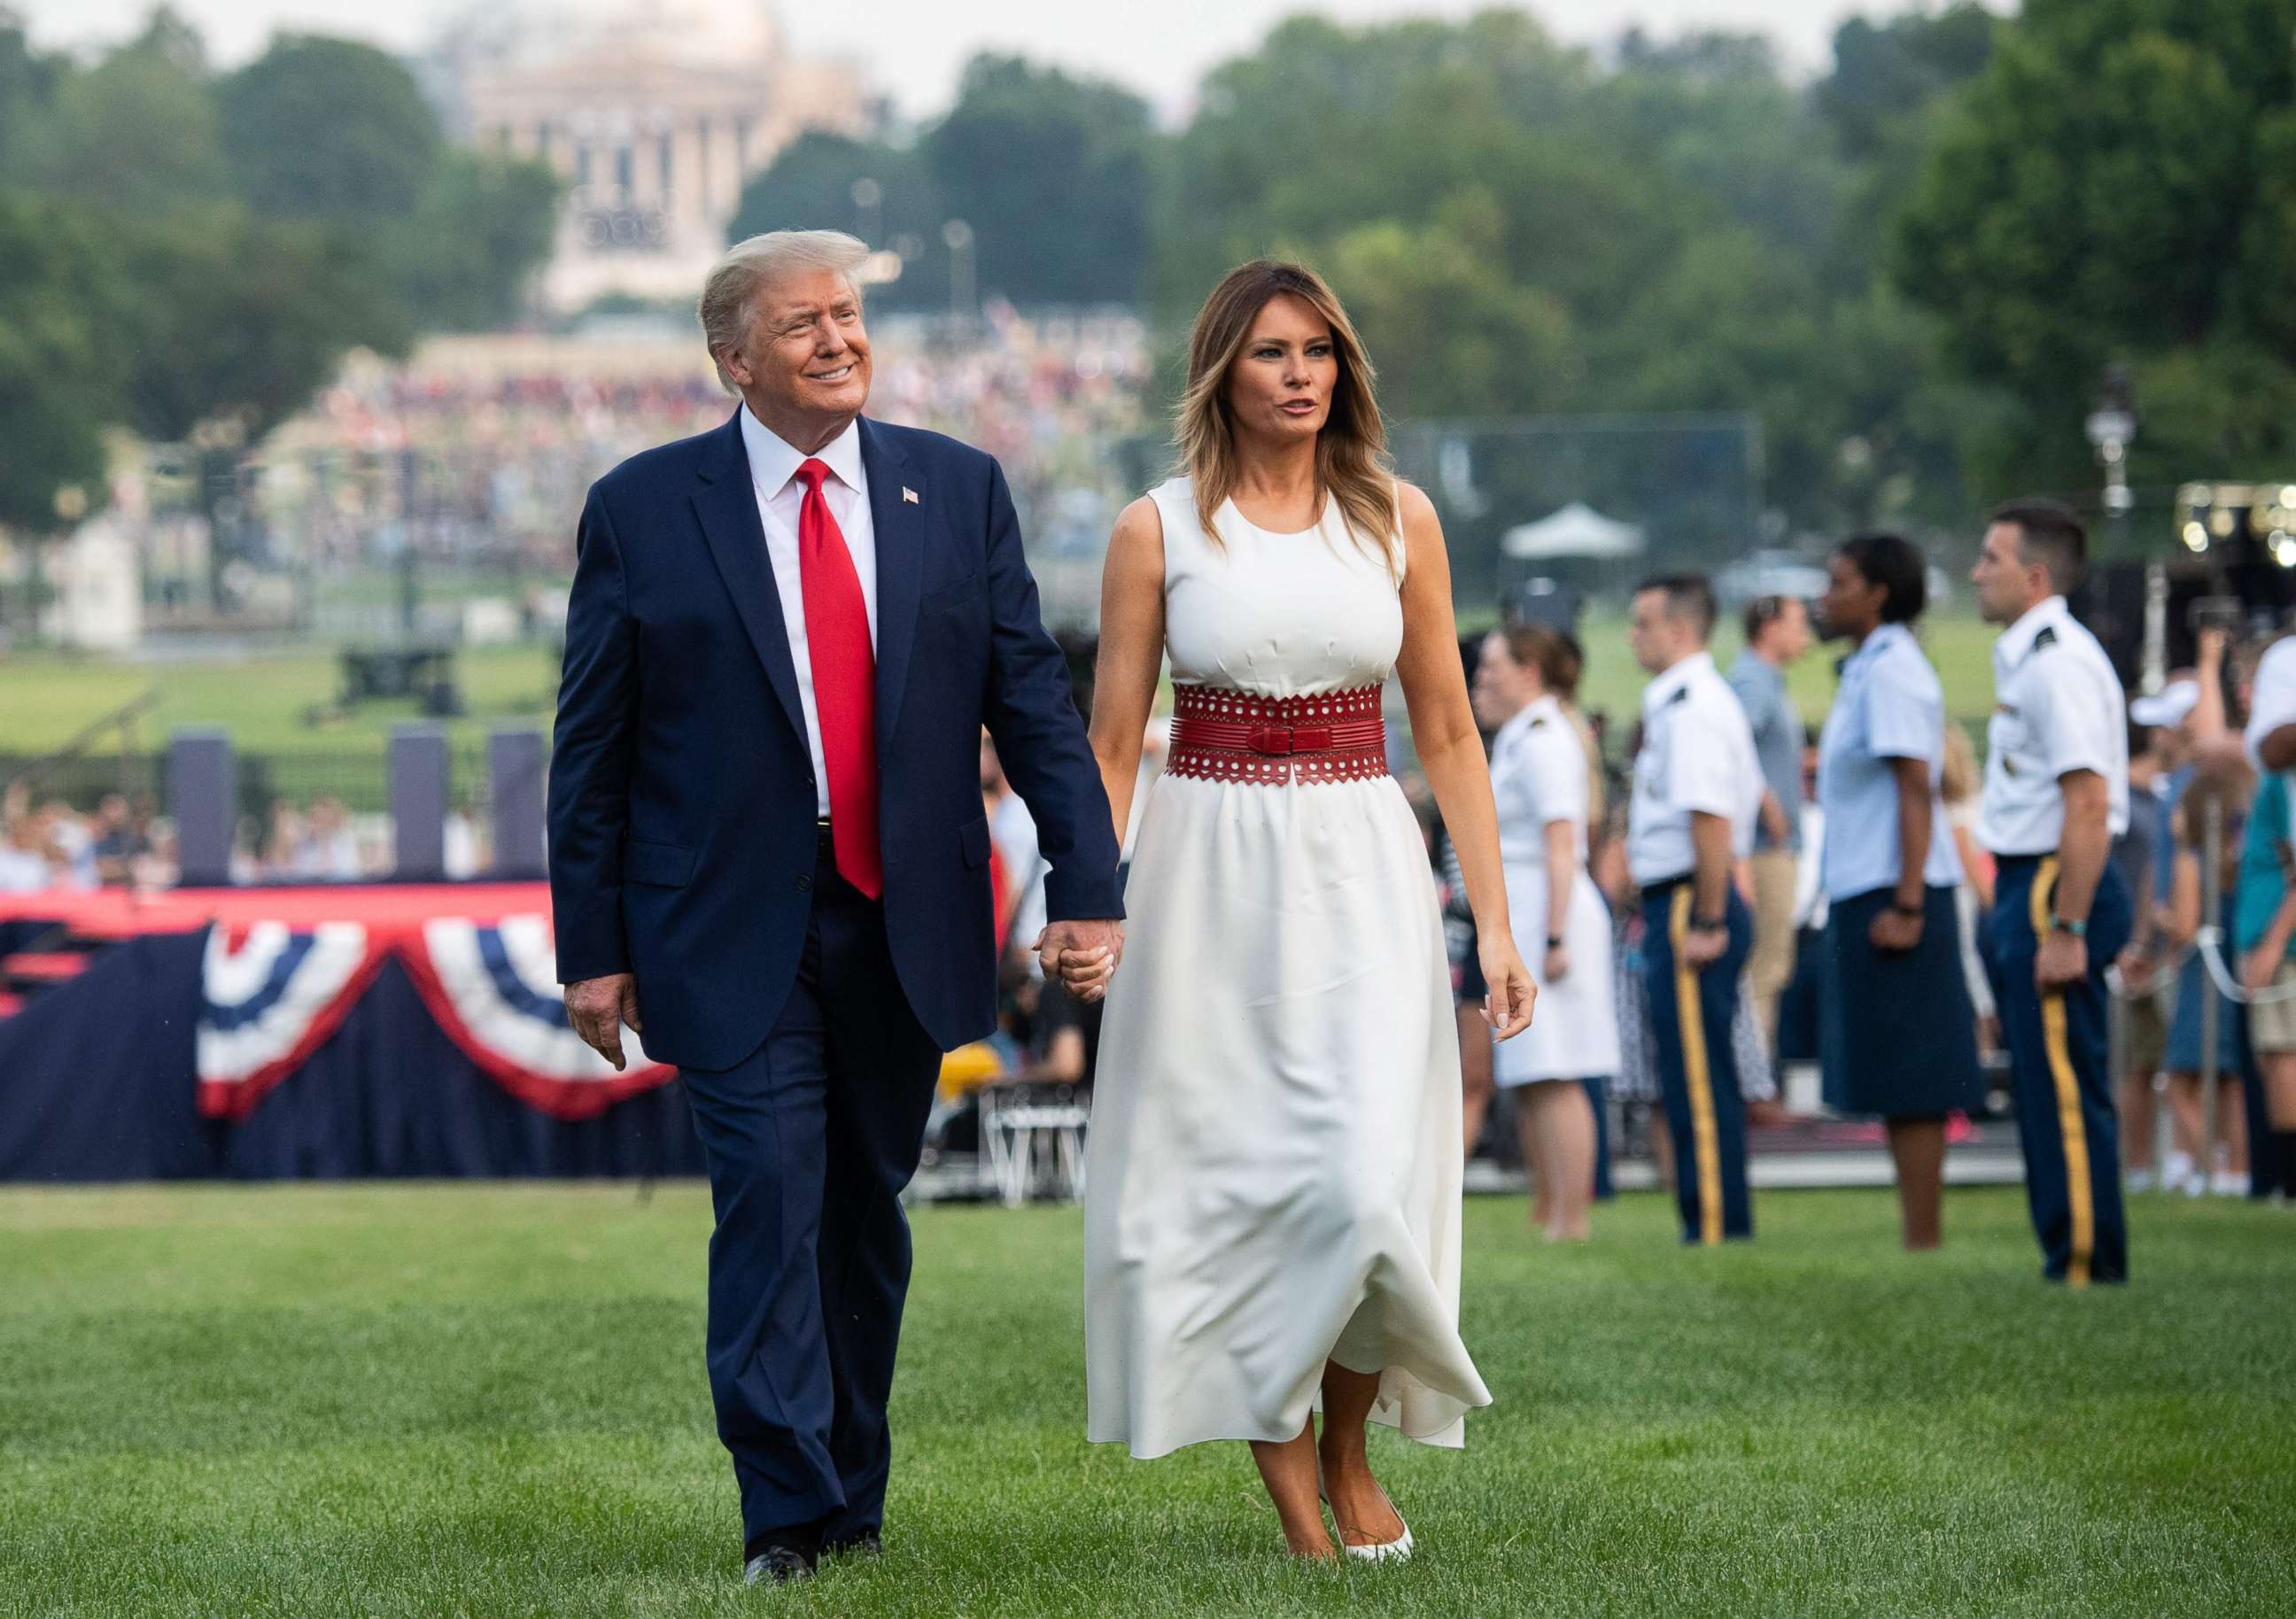 PHOTO: President Donald Trump and first lady Melania Trump host the 2020 "Salute to America" event in honor of Independence Day on the South Lawn of the White House in Washington, D.C., July 4, 2020.